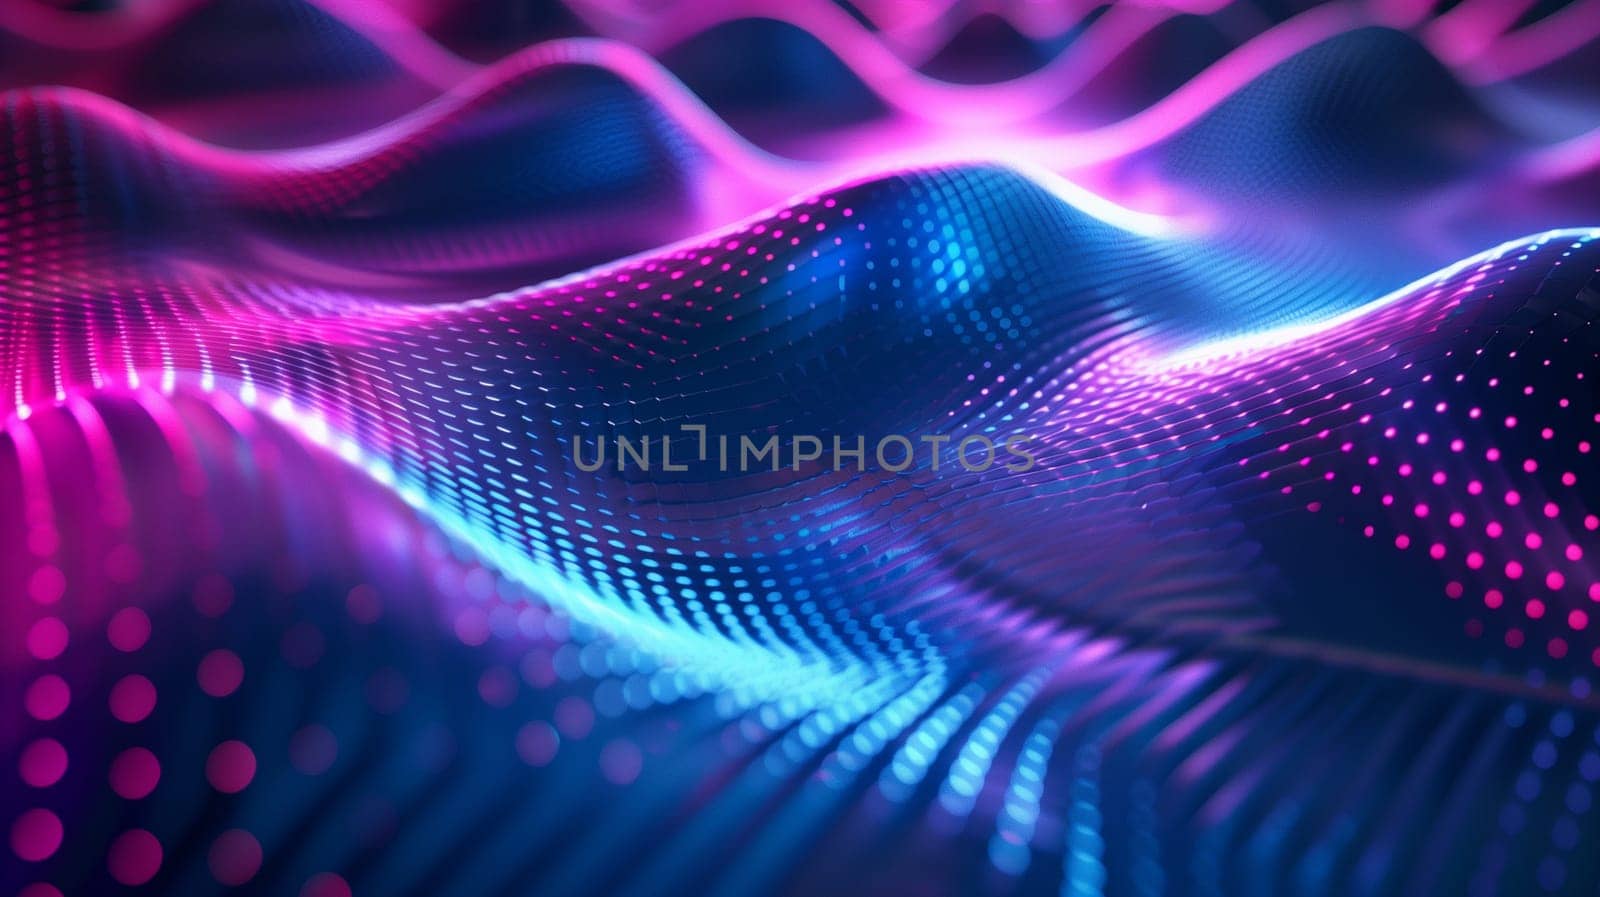 Beautiful 3d background with colorful waves and particles. High quality illustration